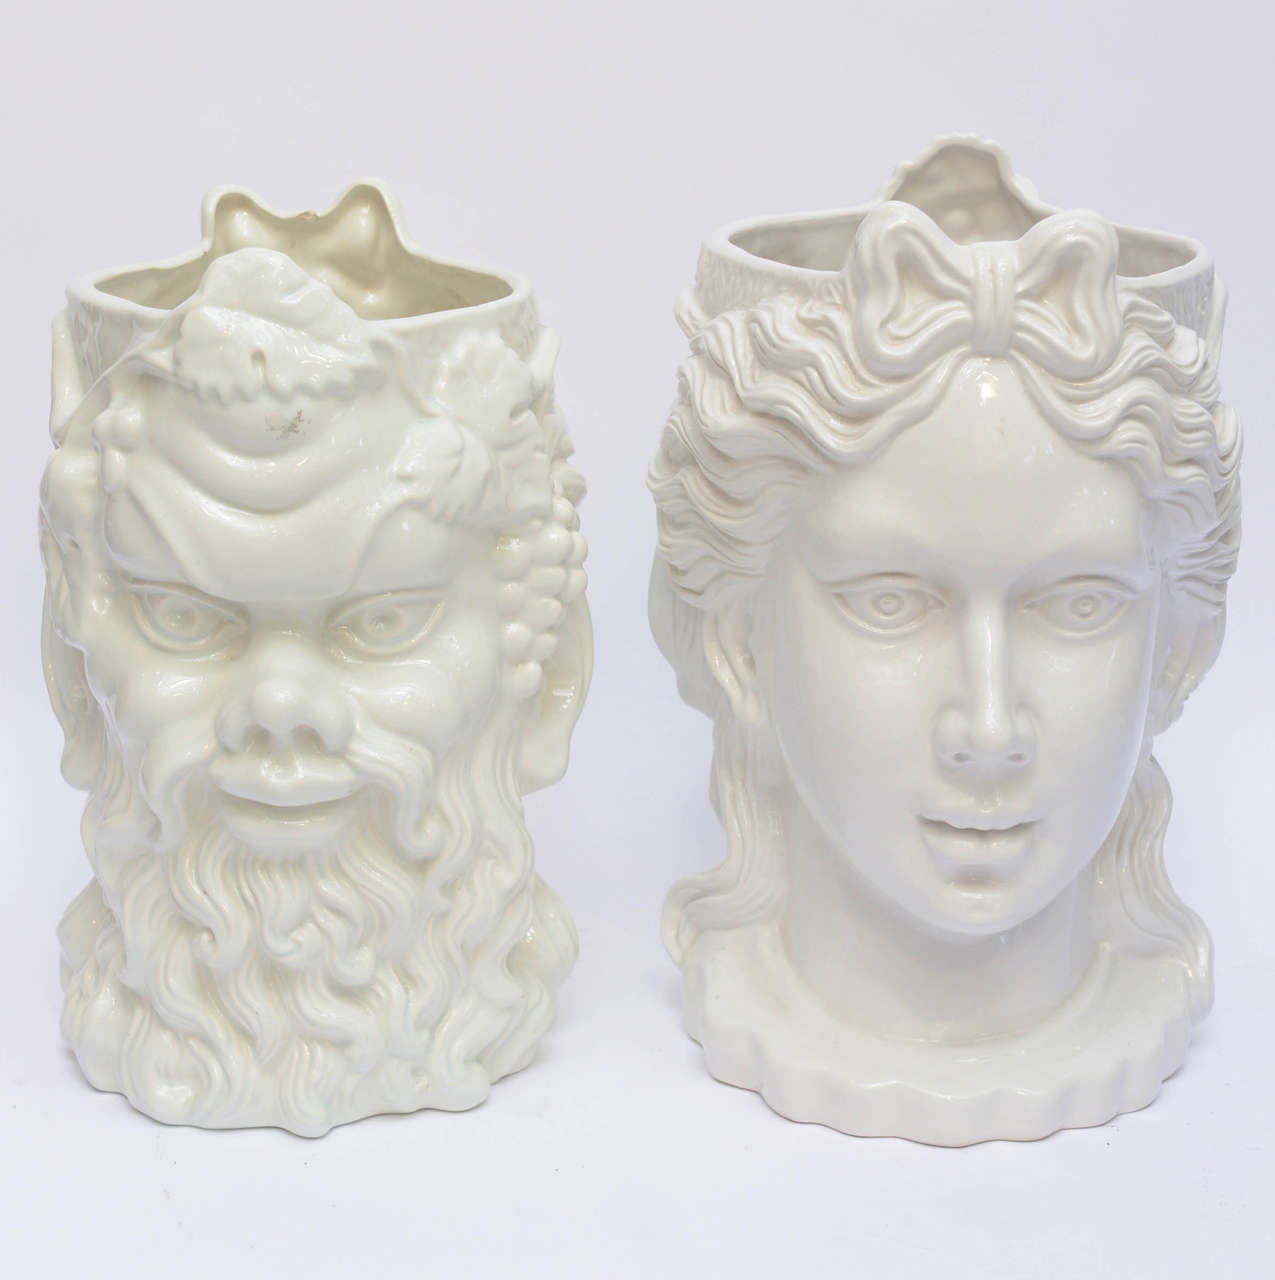 Rare Pair of Italian White Ceramic Planters . These are Double faced, a Grecian Noblewoman and a Satyr.
One Planter is slightly smaller. Large one is 15 Inches tall the other 14 Inches tall.